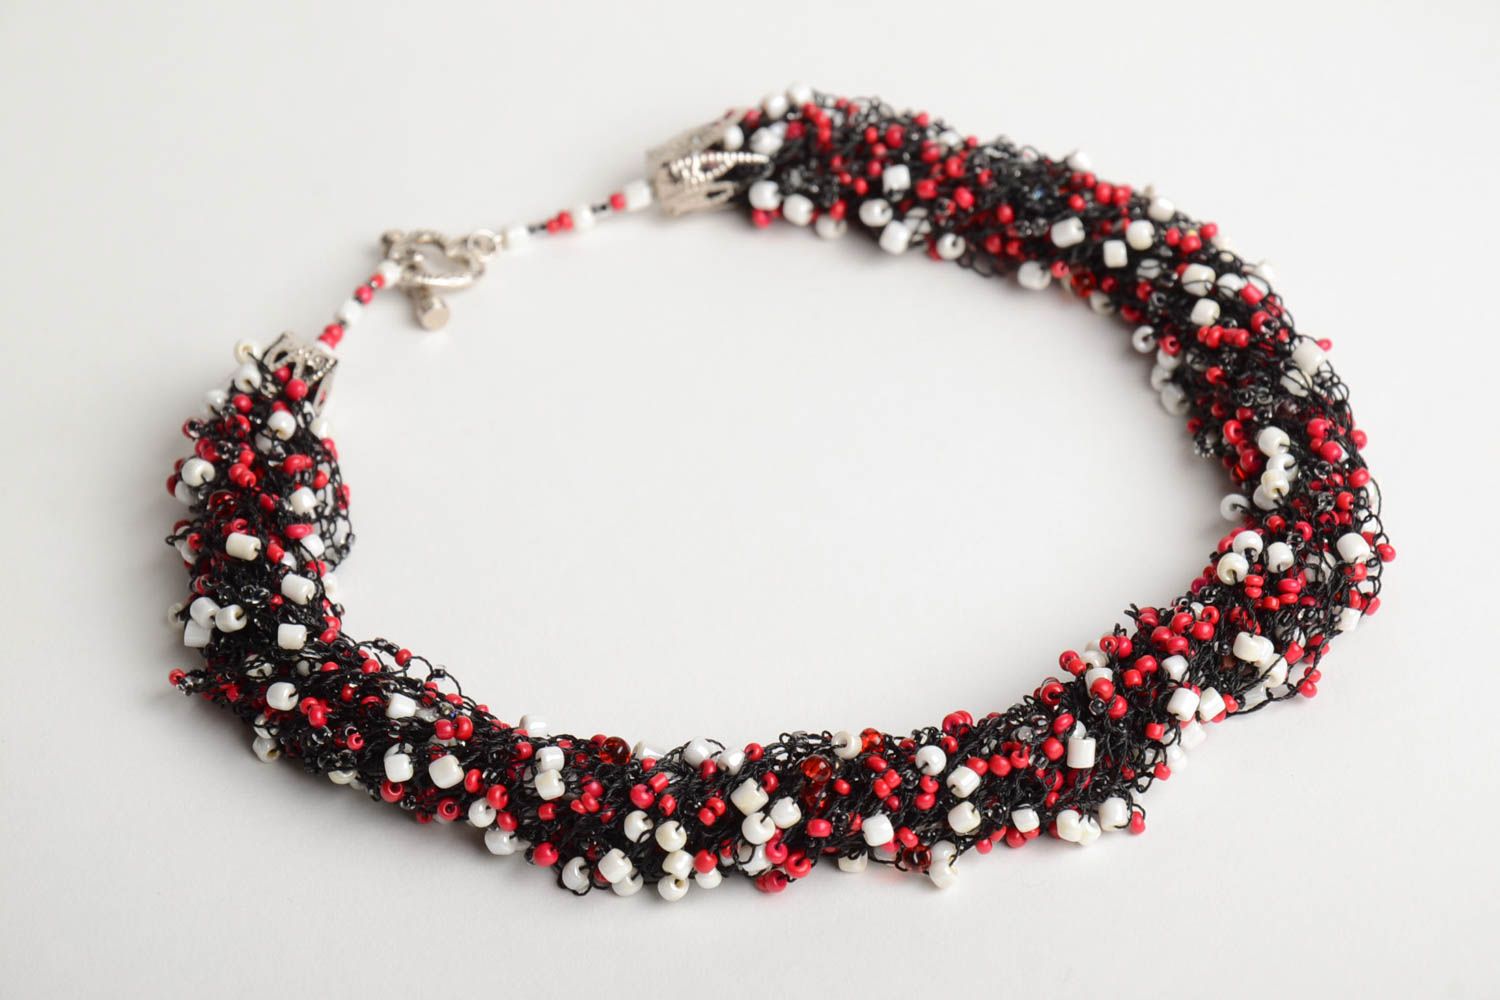 Handmade volume airy necklace crocheted of beads in white red and black colors photo 3